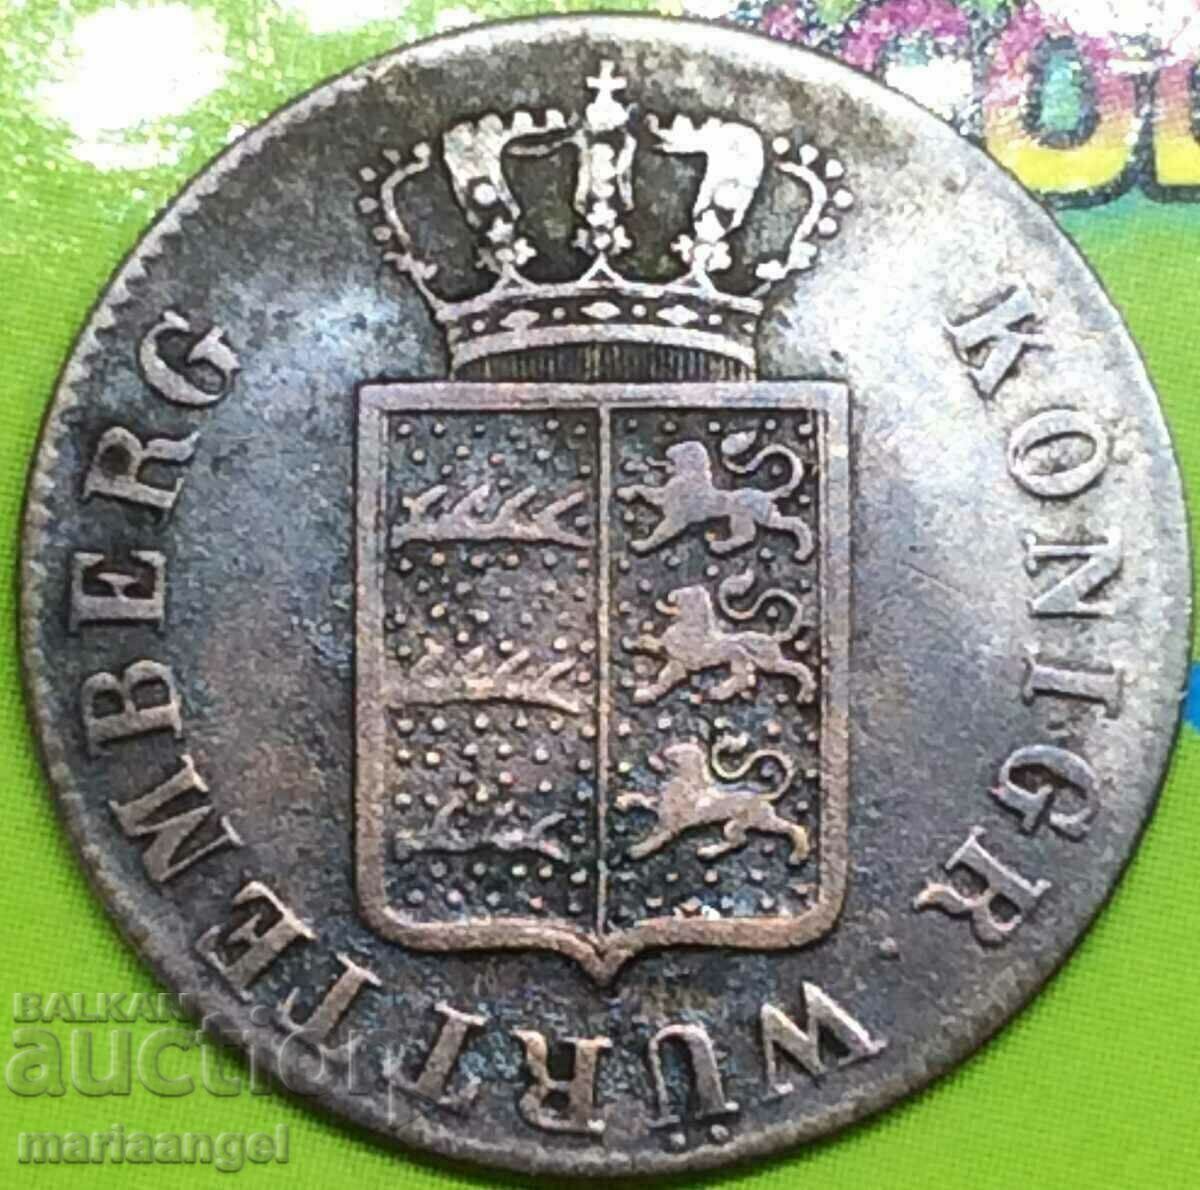 6 Kreuzer 1842 Württemberg Germany silver - rare and expensive